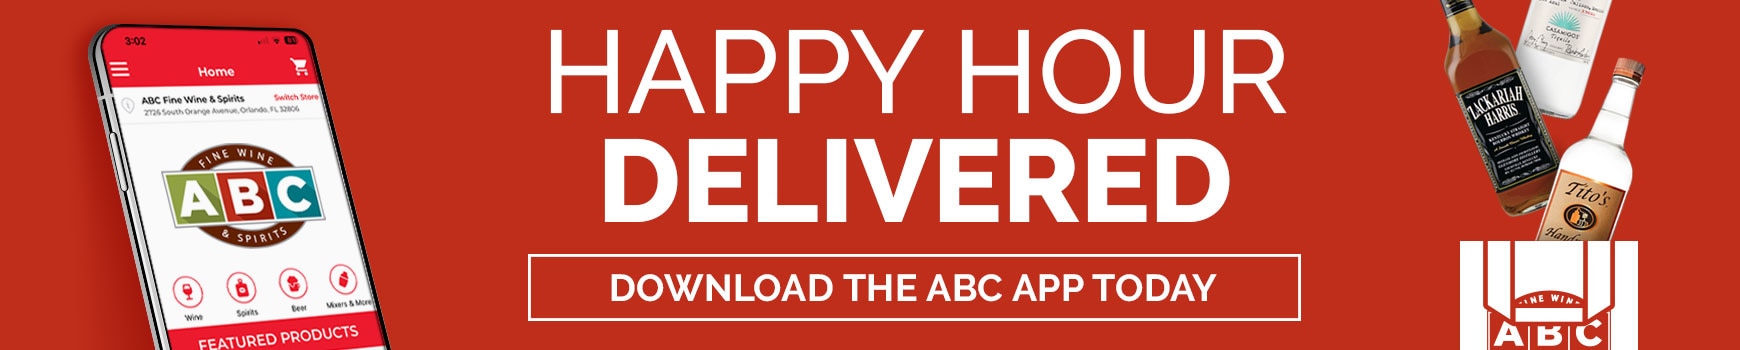 Happy Hour Delivered. Download the App Today.